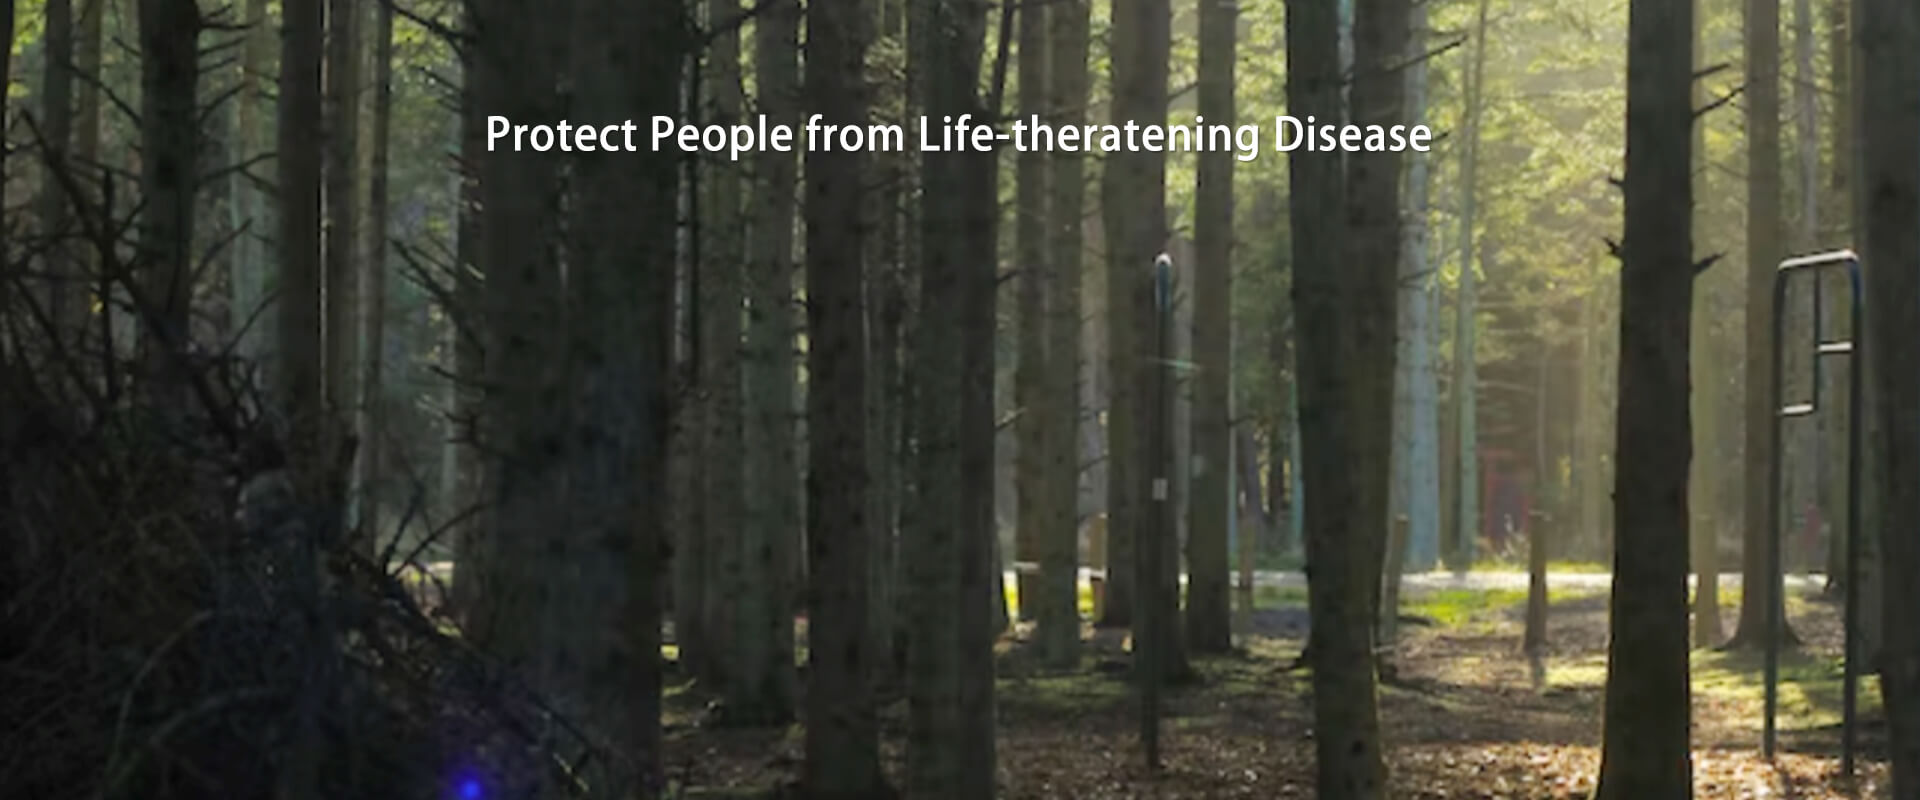 Protect People from Life-threatening Disease